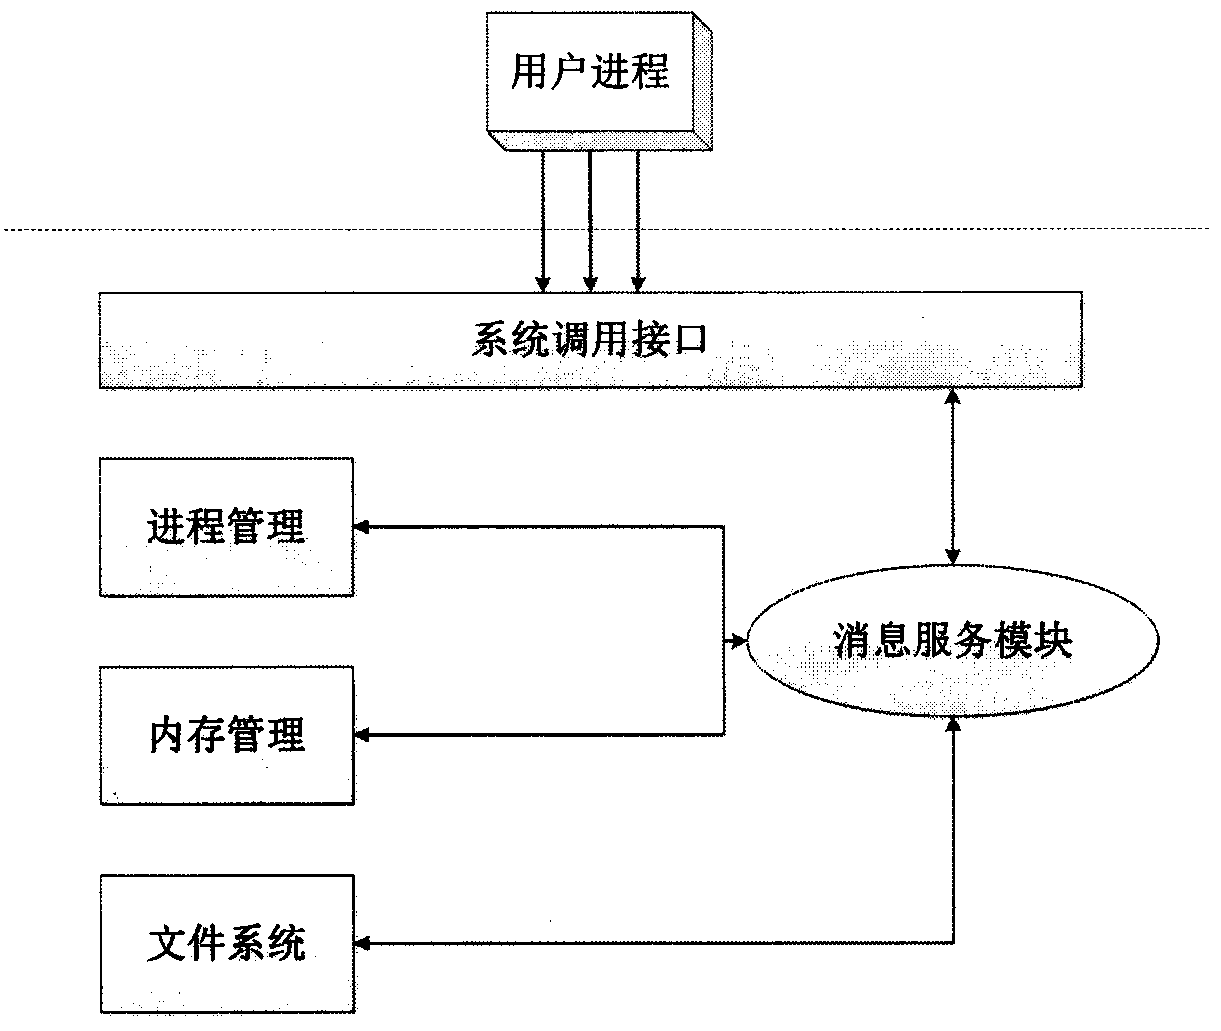 Design scheme of message service module supporting kernel module isolation